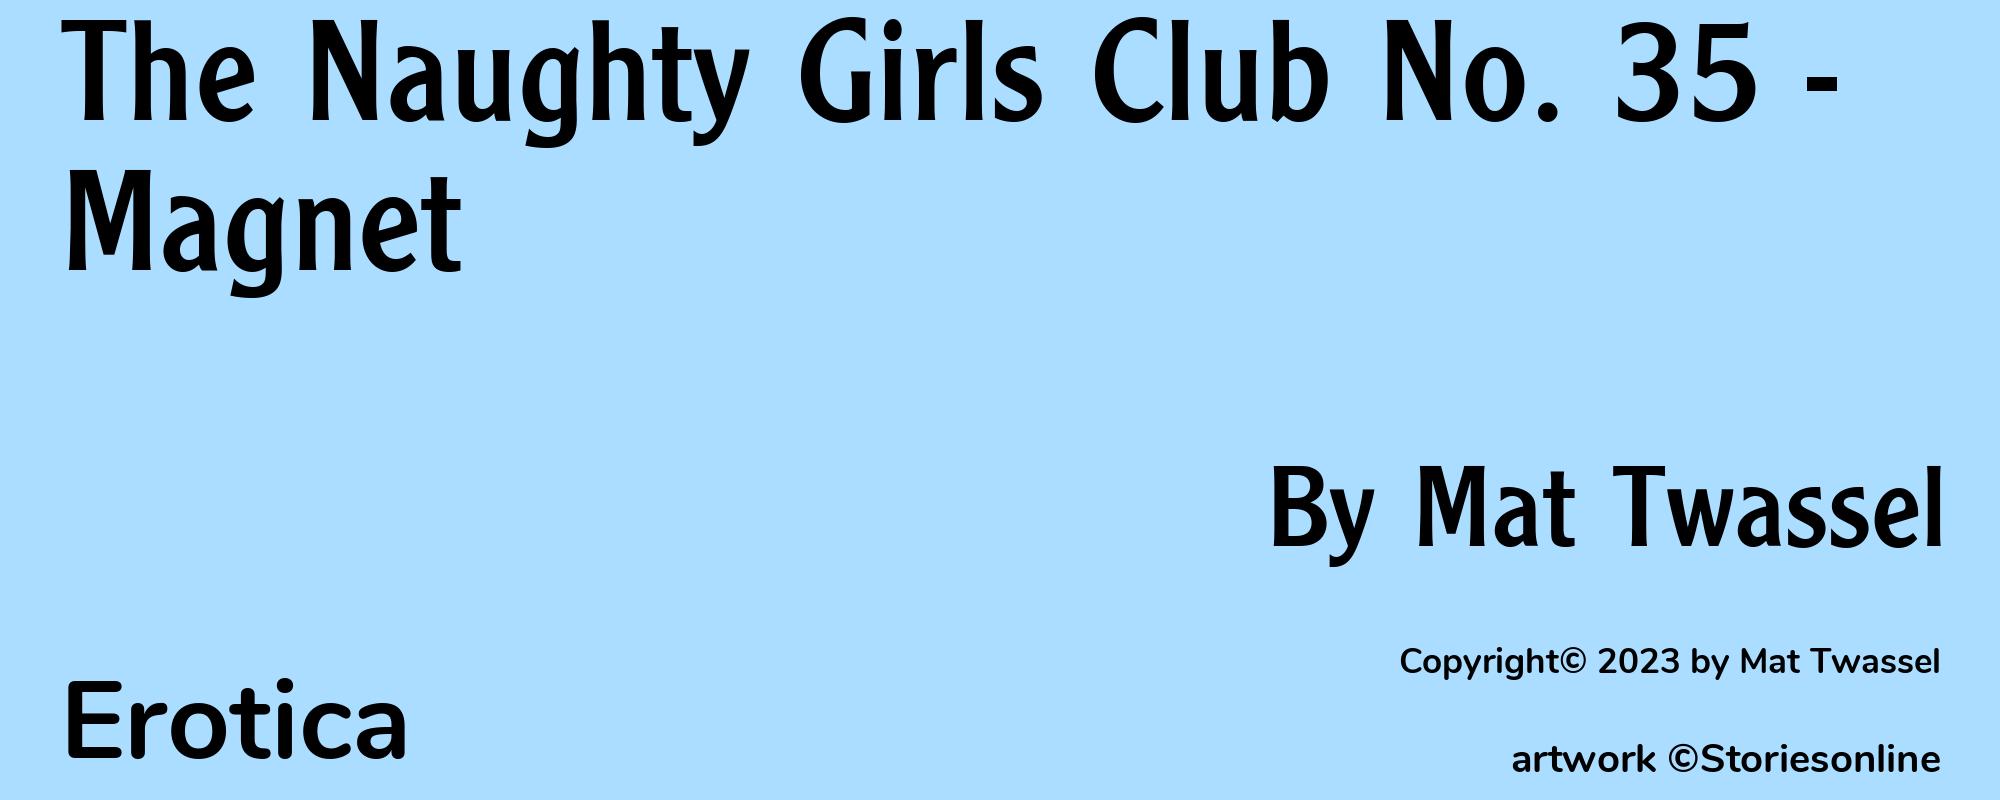 The Naughty Girls Club No. 35 - Magnet - Cover